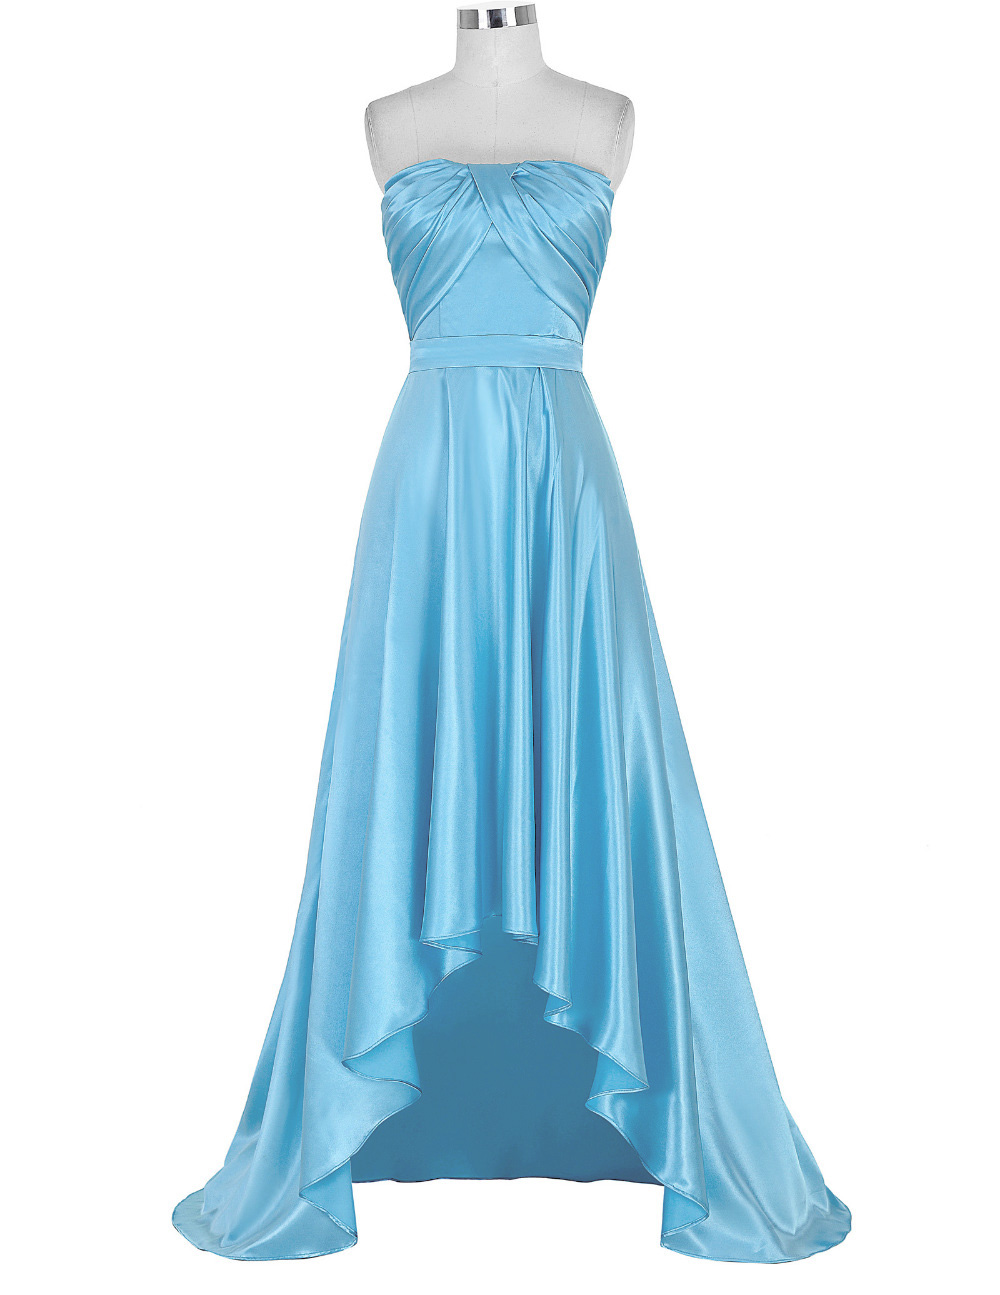 Blue Satin High Low A-line Prom Dress Featuring Ruched Strapless Straight Across Bodice